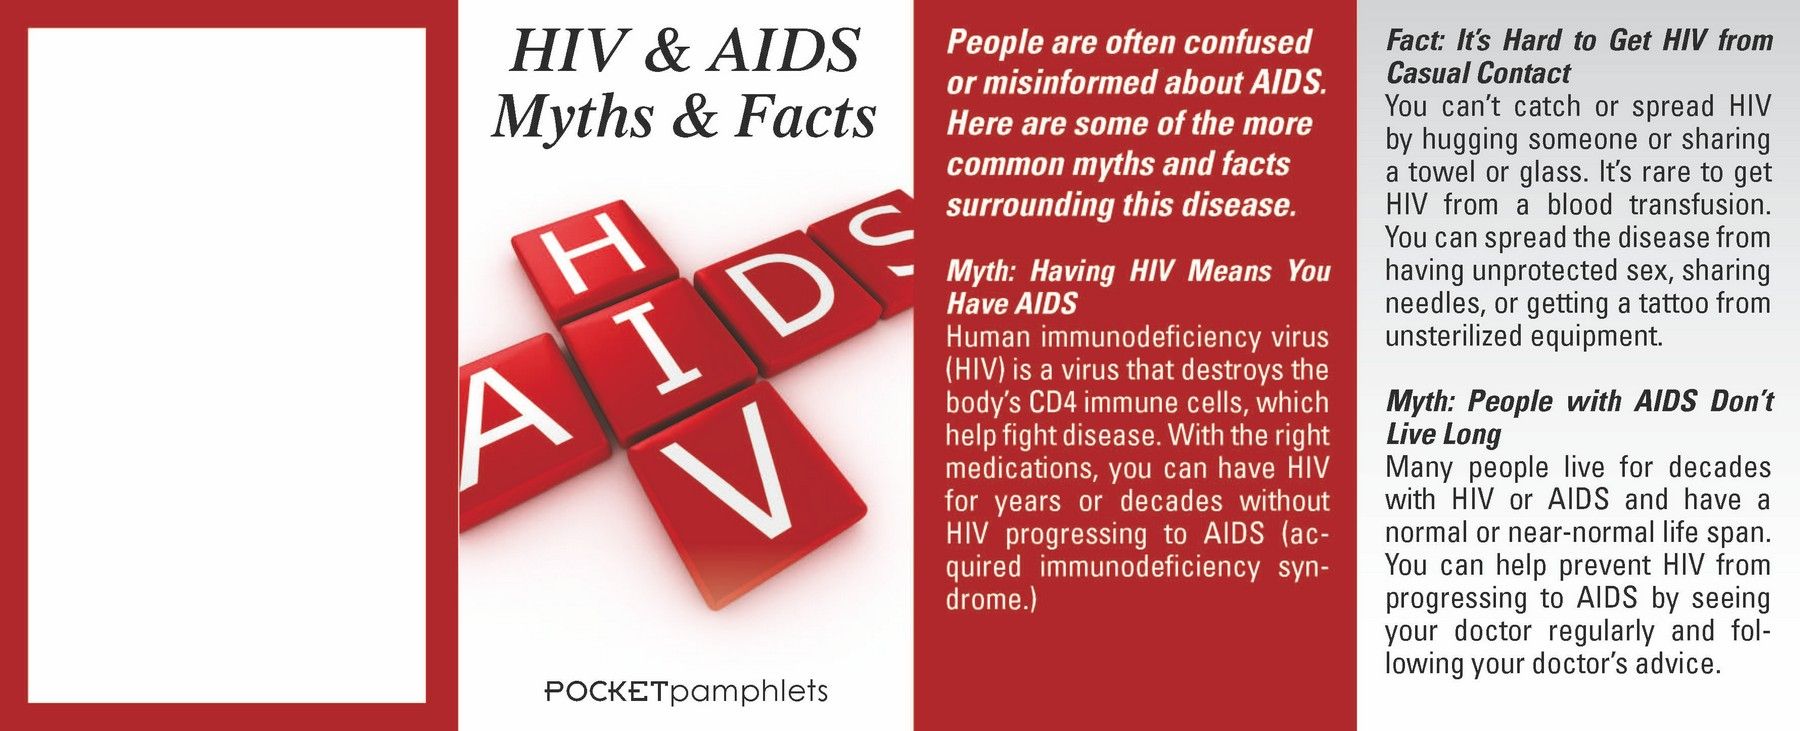 Тише спид ап. About AIDS. HIV AIDS. Myths about HIV and AIDS. Pamphlet for HIV.